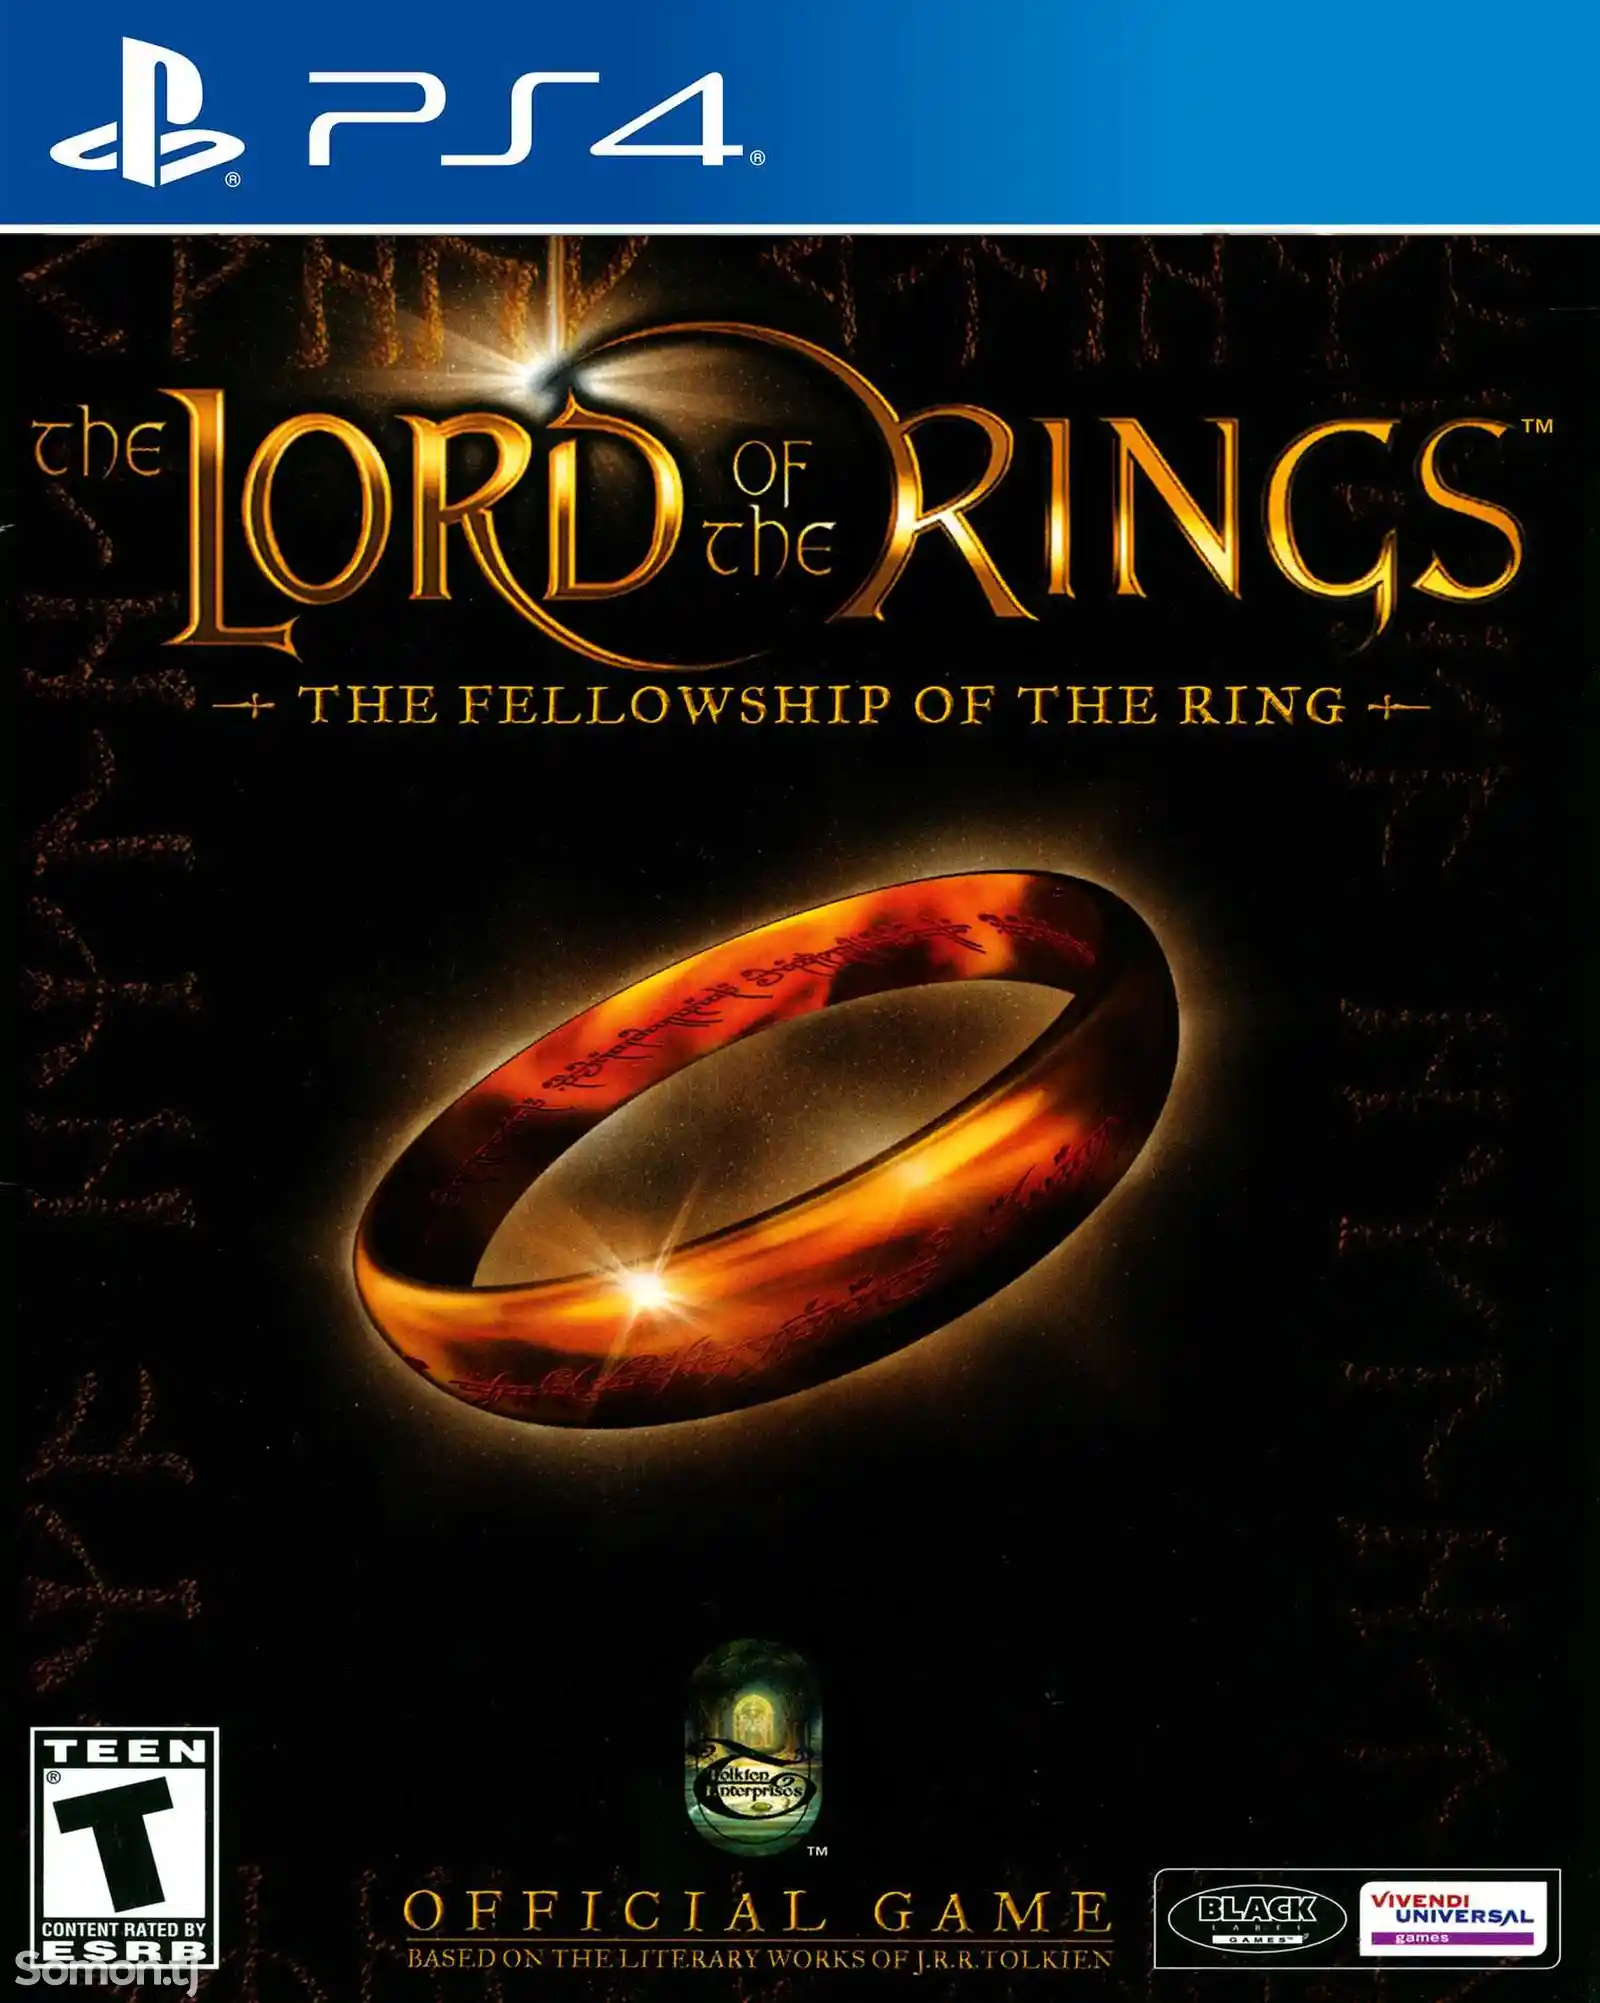 Игра Lord of the rings the fellowship of the ring для PS-4 / 6.72 / 9.00 /-1